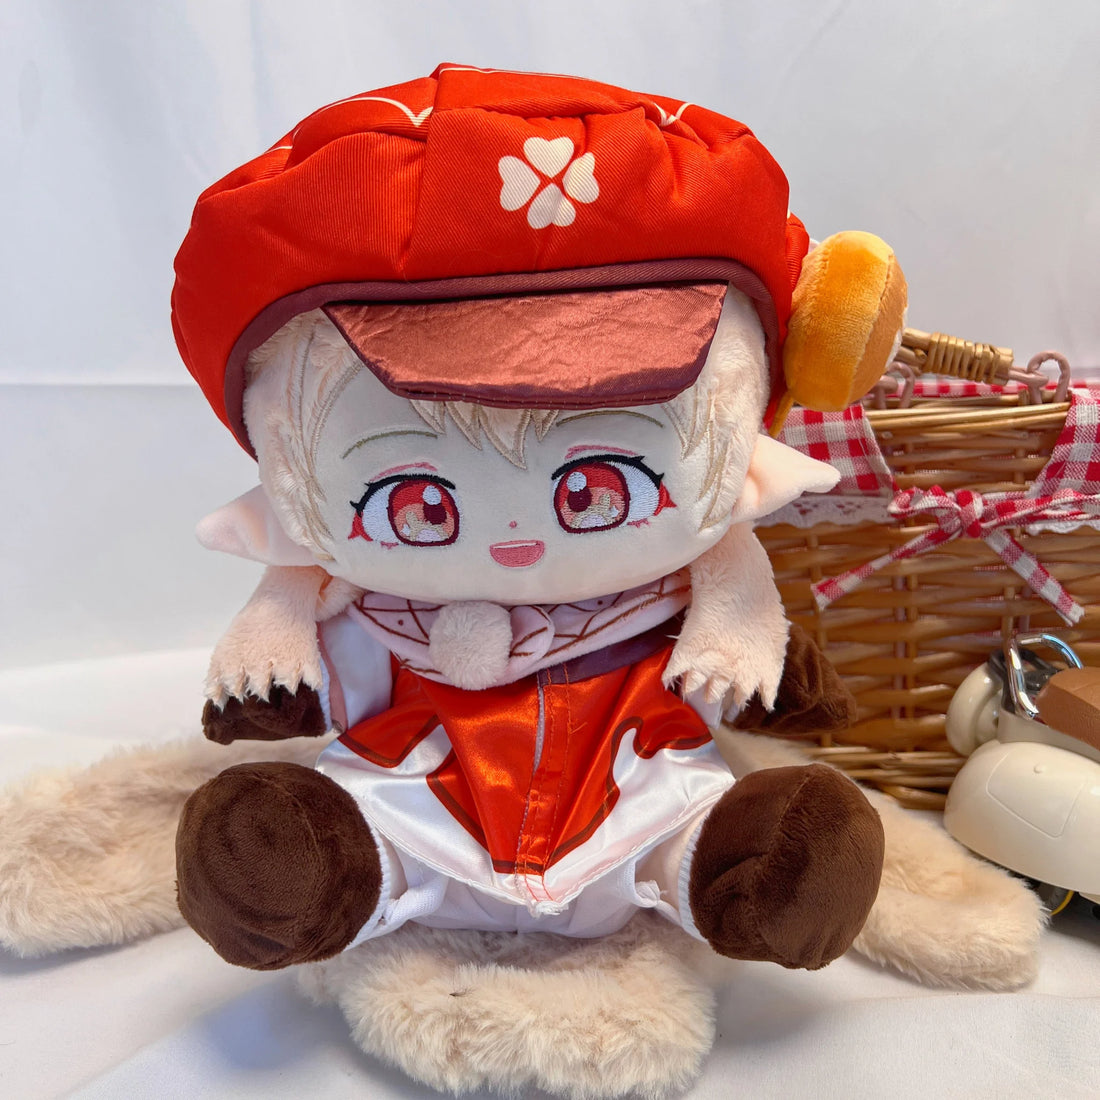 Big 30Cm-On Salegenshin Klee Plush With Outfit And Bag Cute Doll With Bones Outfit